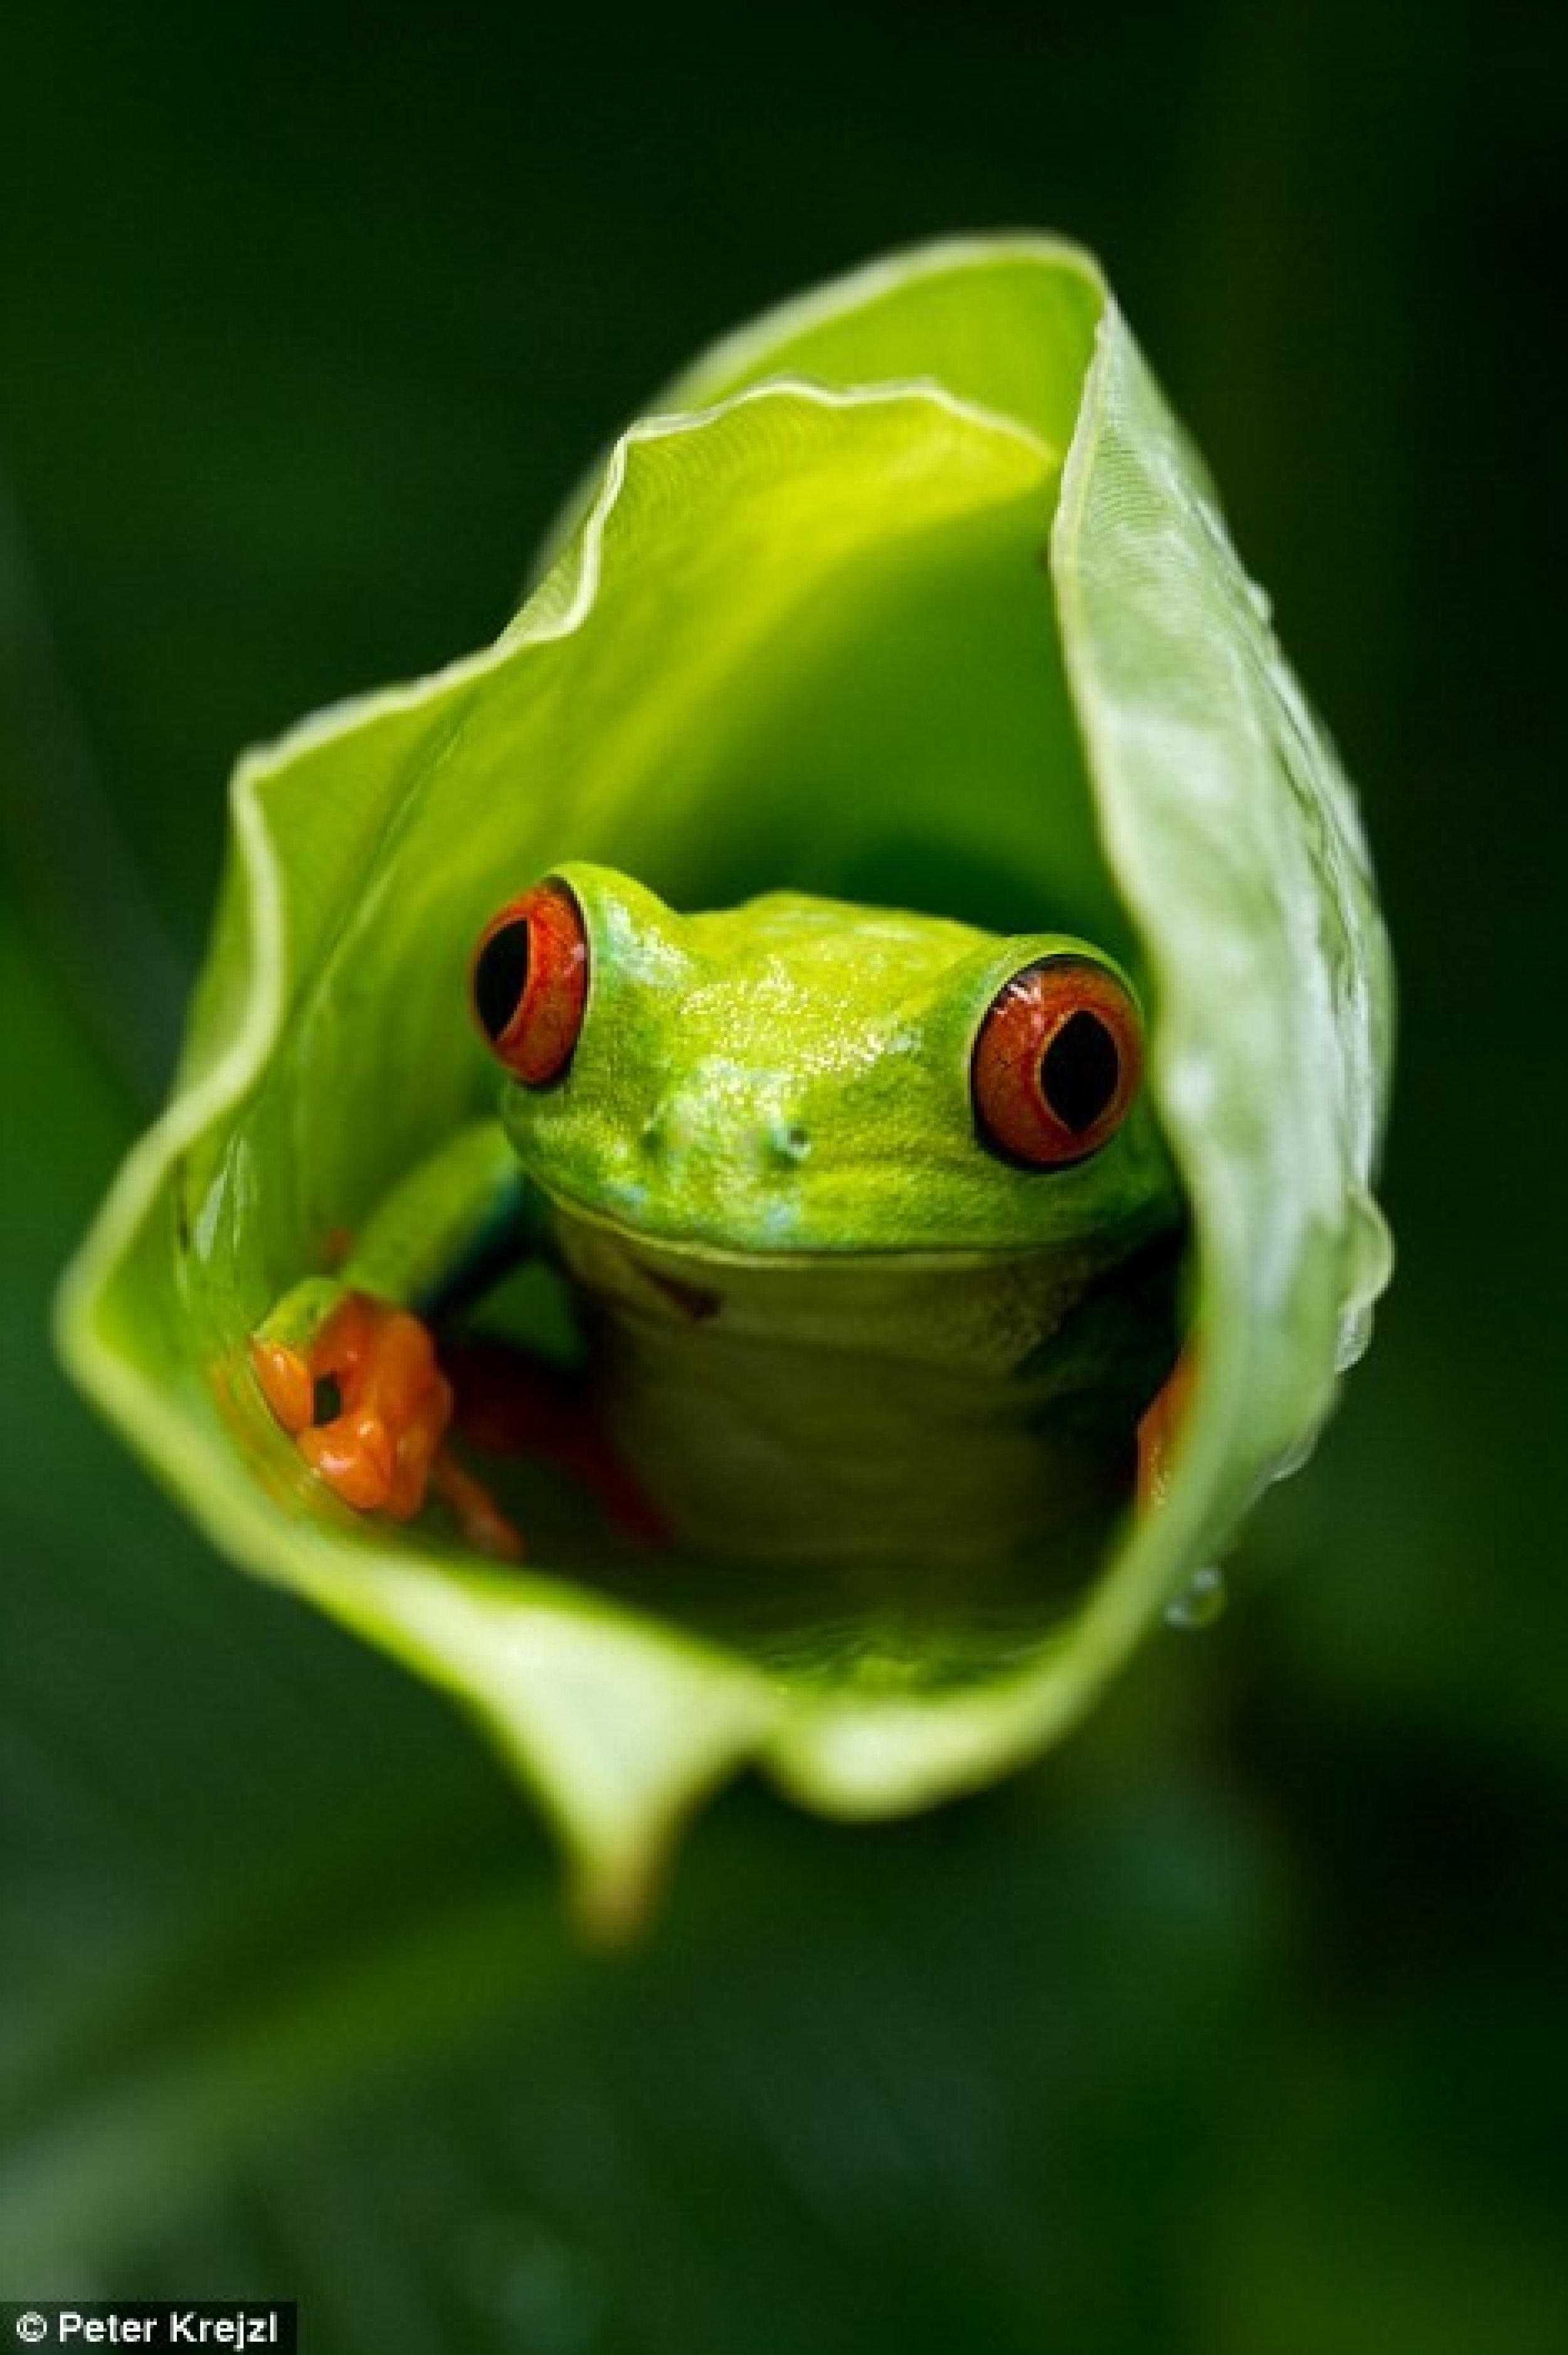 A small frog peers out from inside a plant